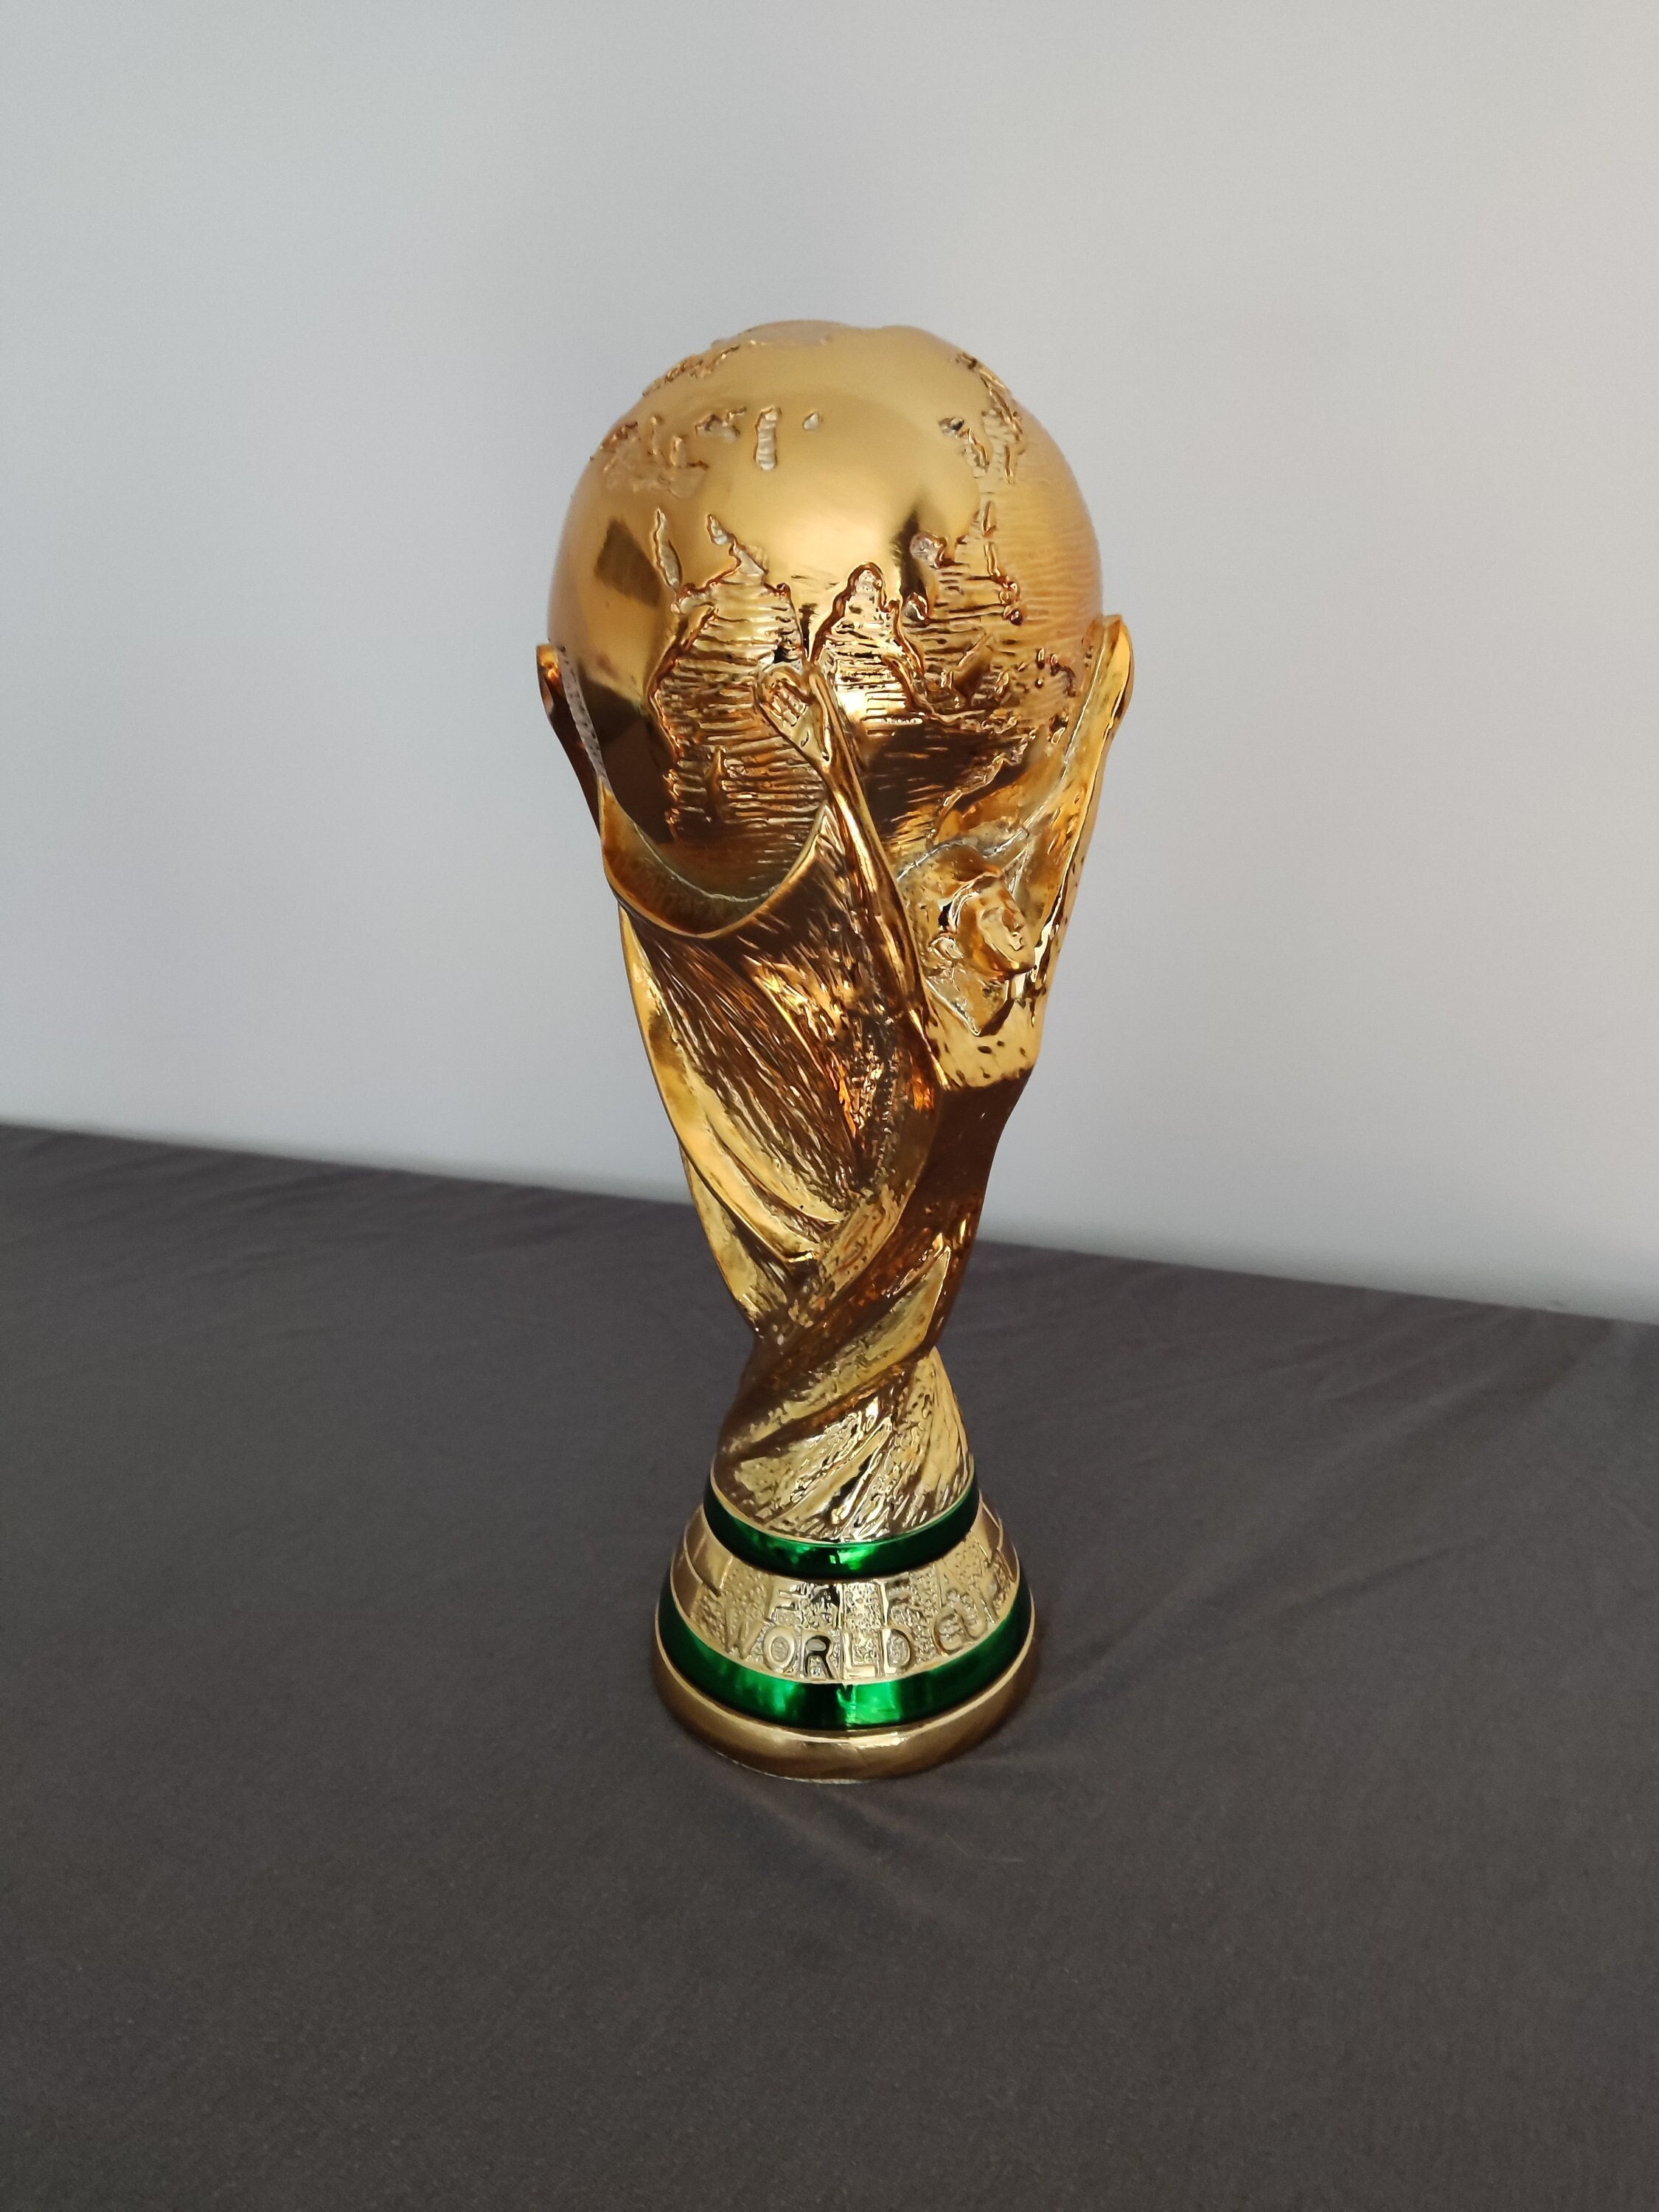  LNGODEHO 2022 World Cup Replica Trophy in Display